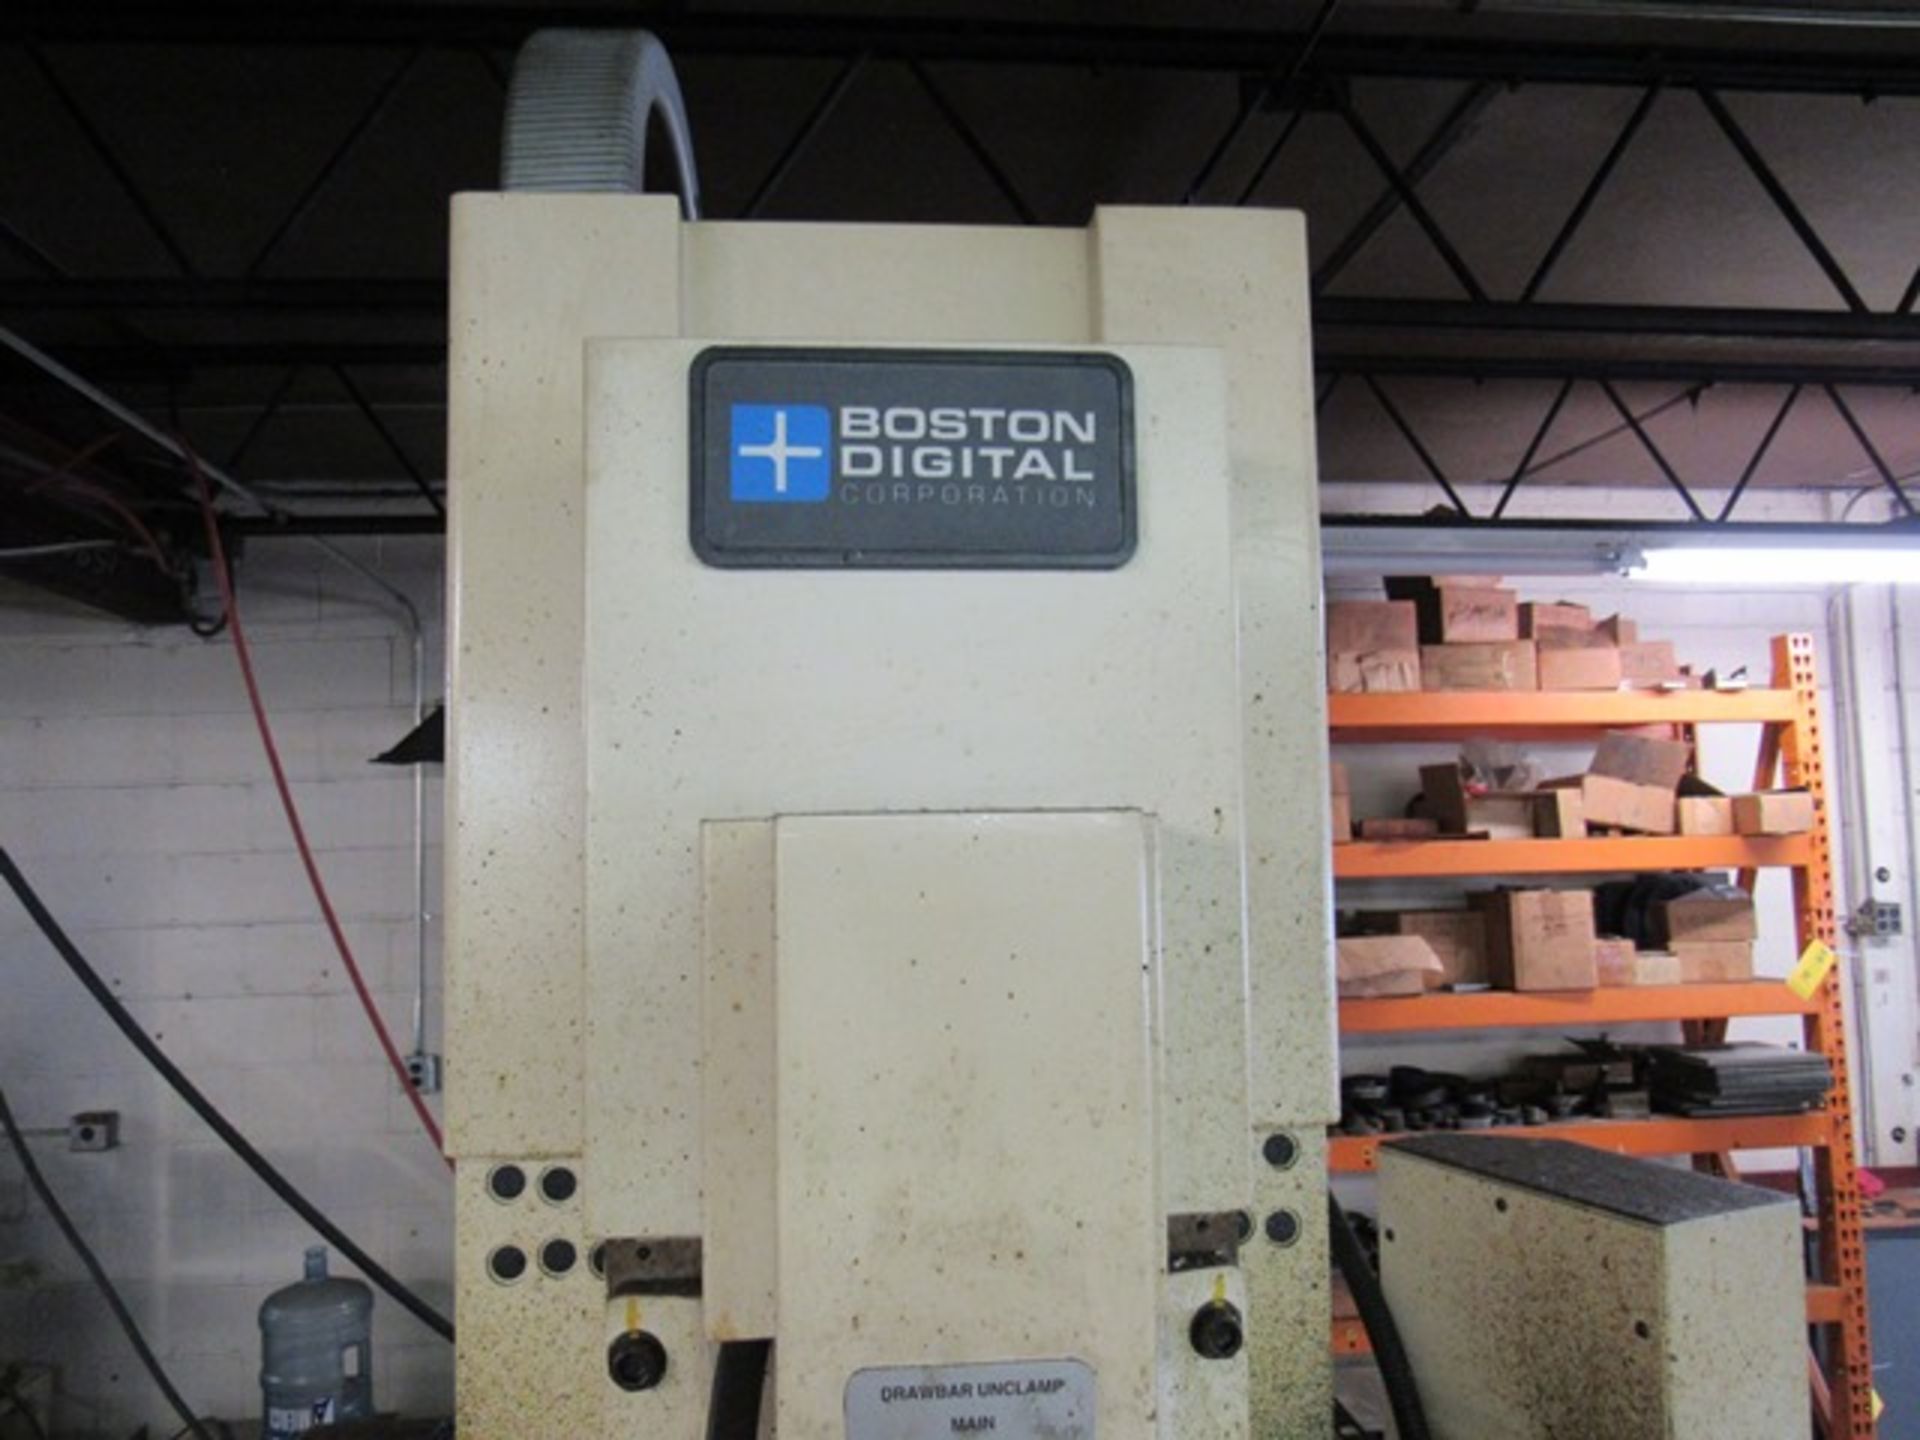 Boston Matic CNC Milling Machine, Model #BD18-1, S/N #18-224, Volts 440, Phase 3, Rigging Fee: $1300 - Image 4 of 11